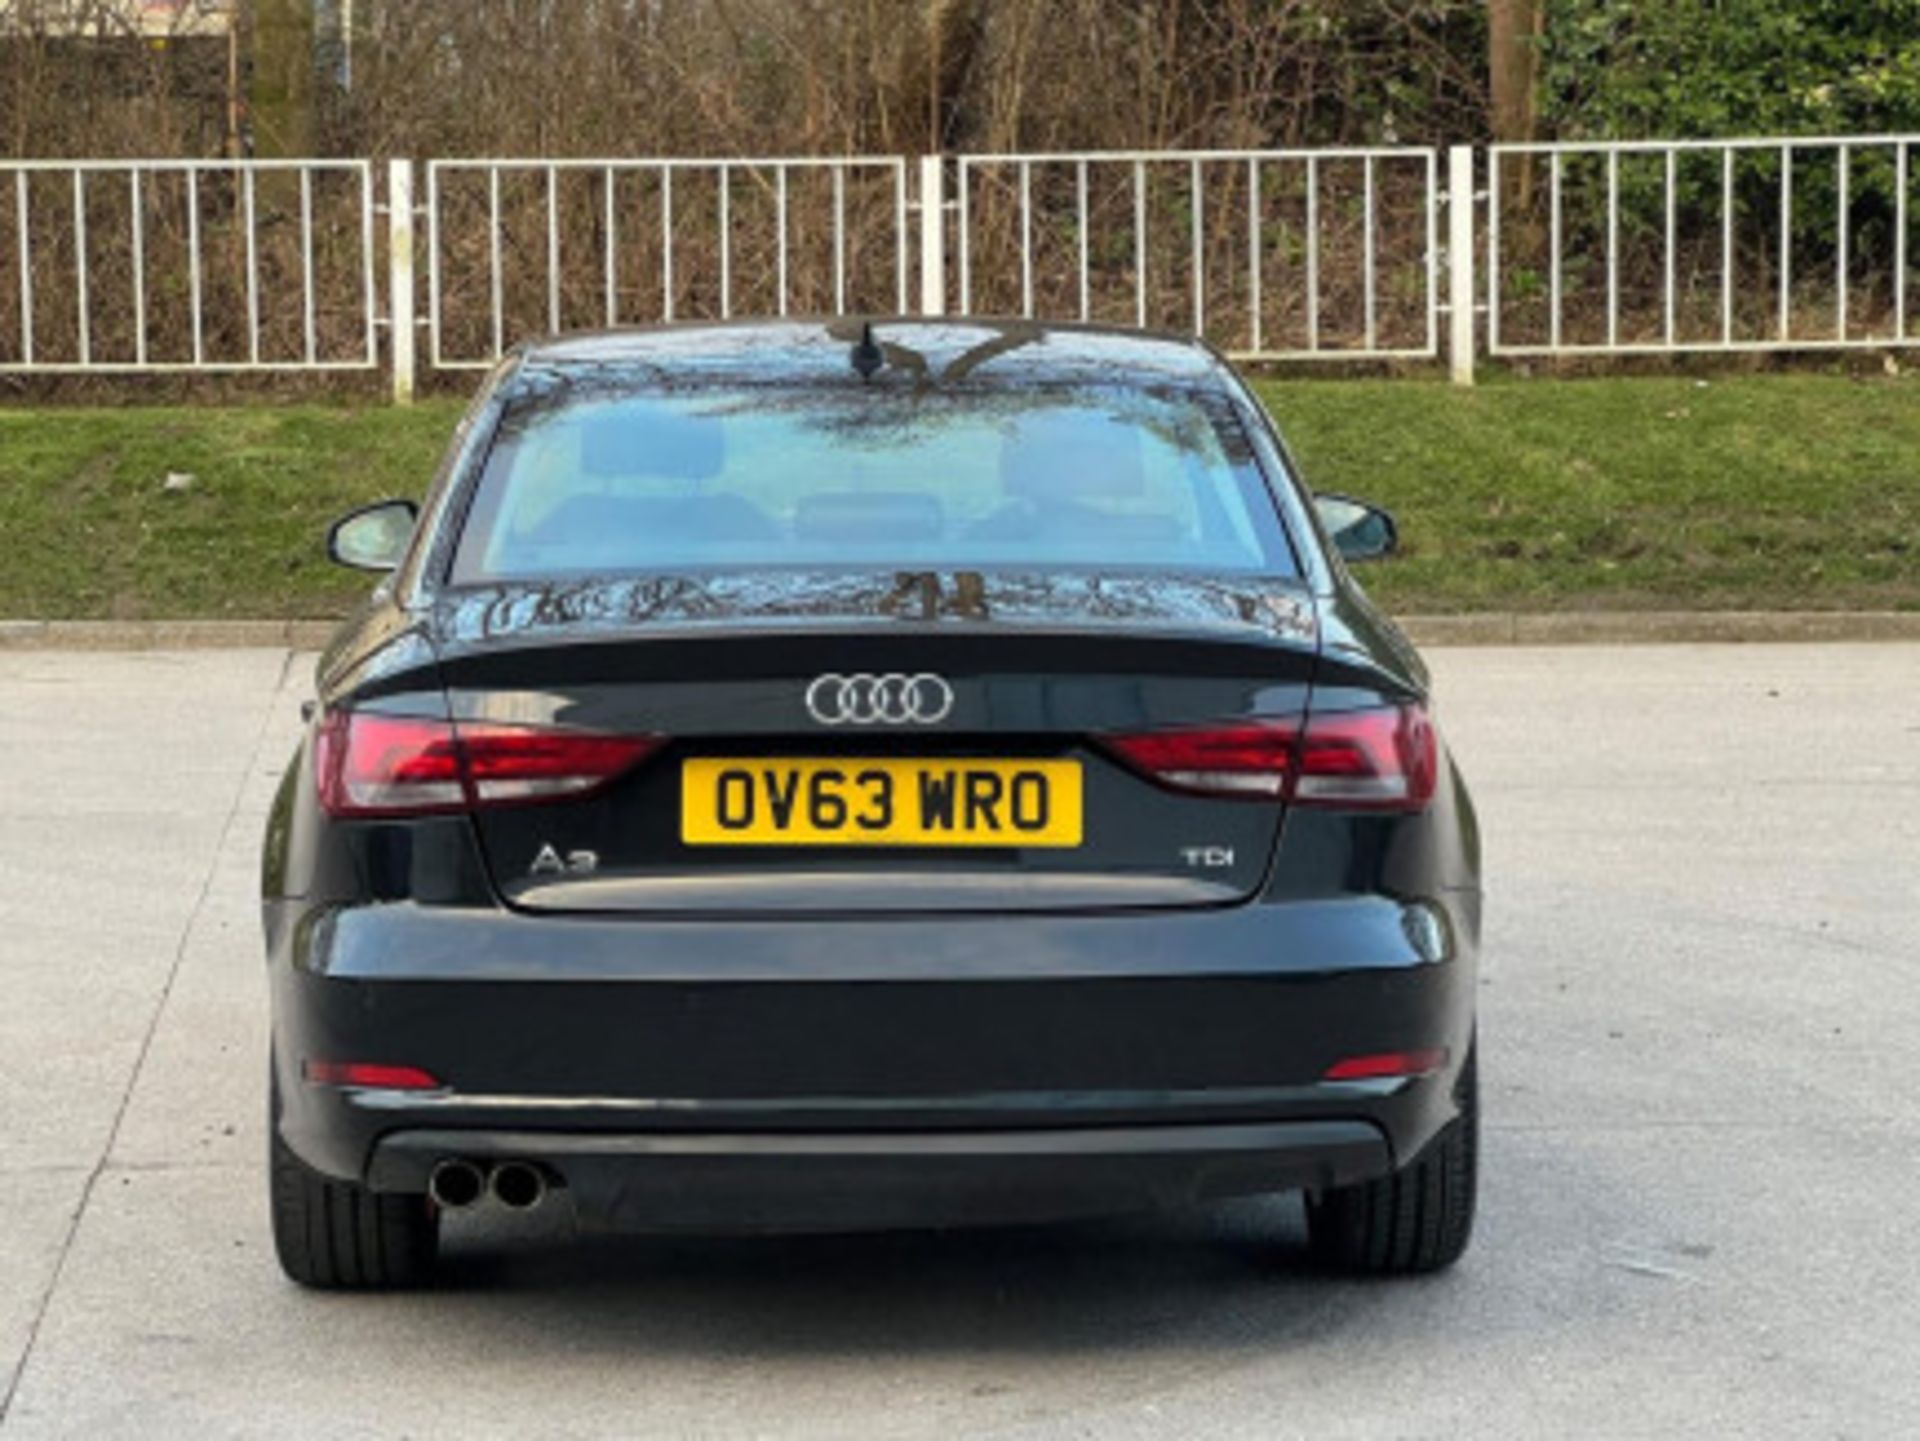 AUDI A3 2.0TDI SPORTBACK - STYLE, PERFORMANCE, AND COMFORT COMBINED >>--NO VAT ON HAMMER--<< - Image 112 of 216